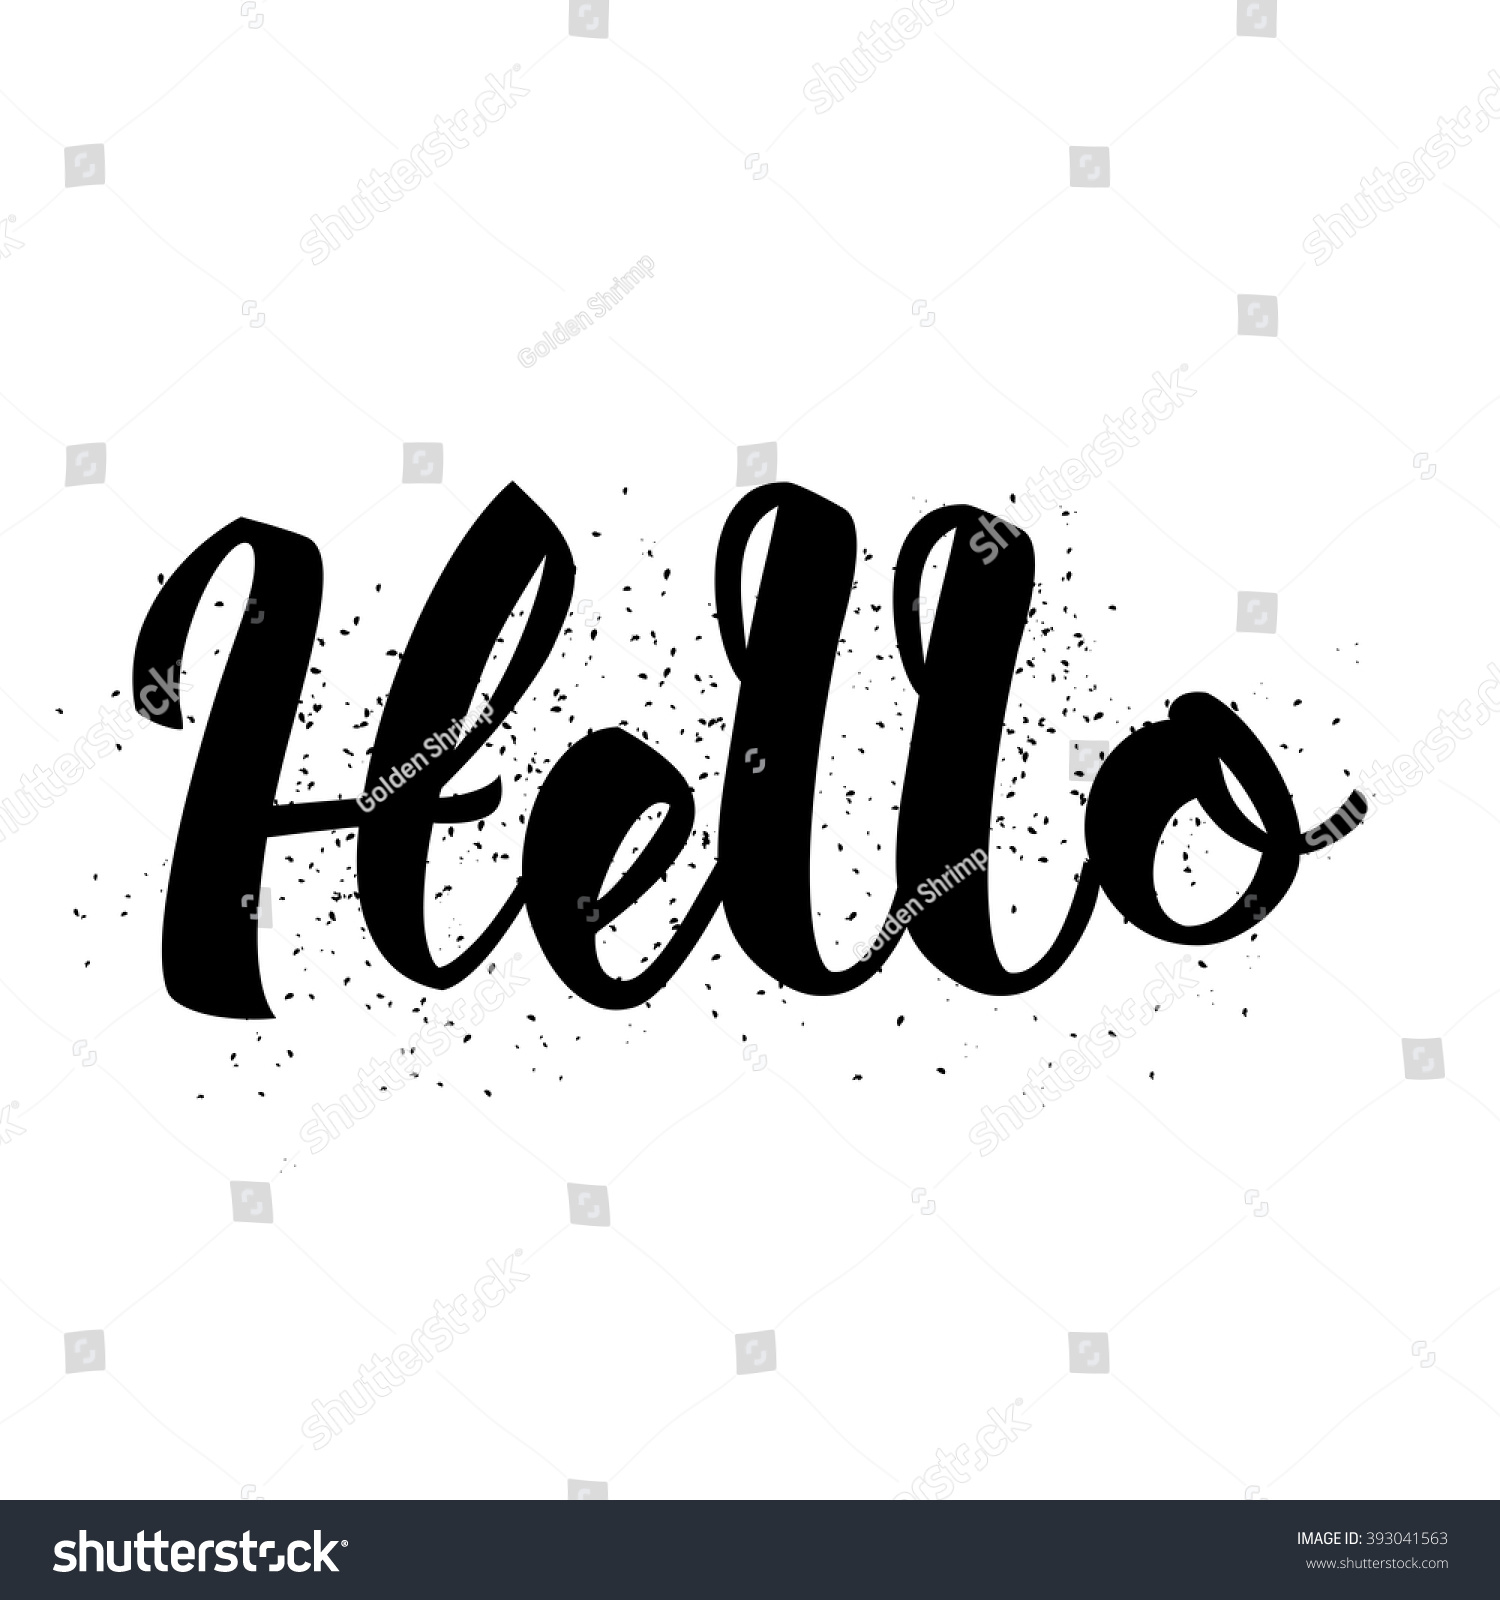 What are some different hello greetings for a letter?